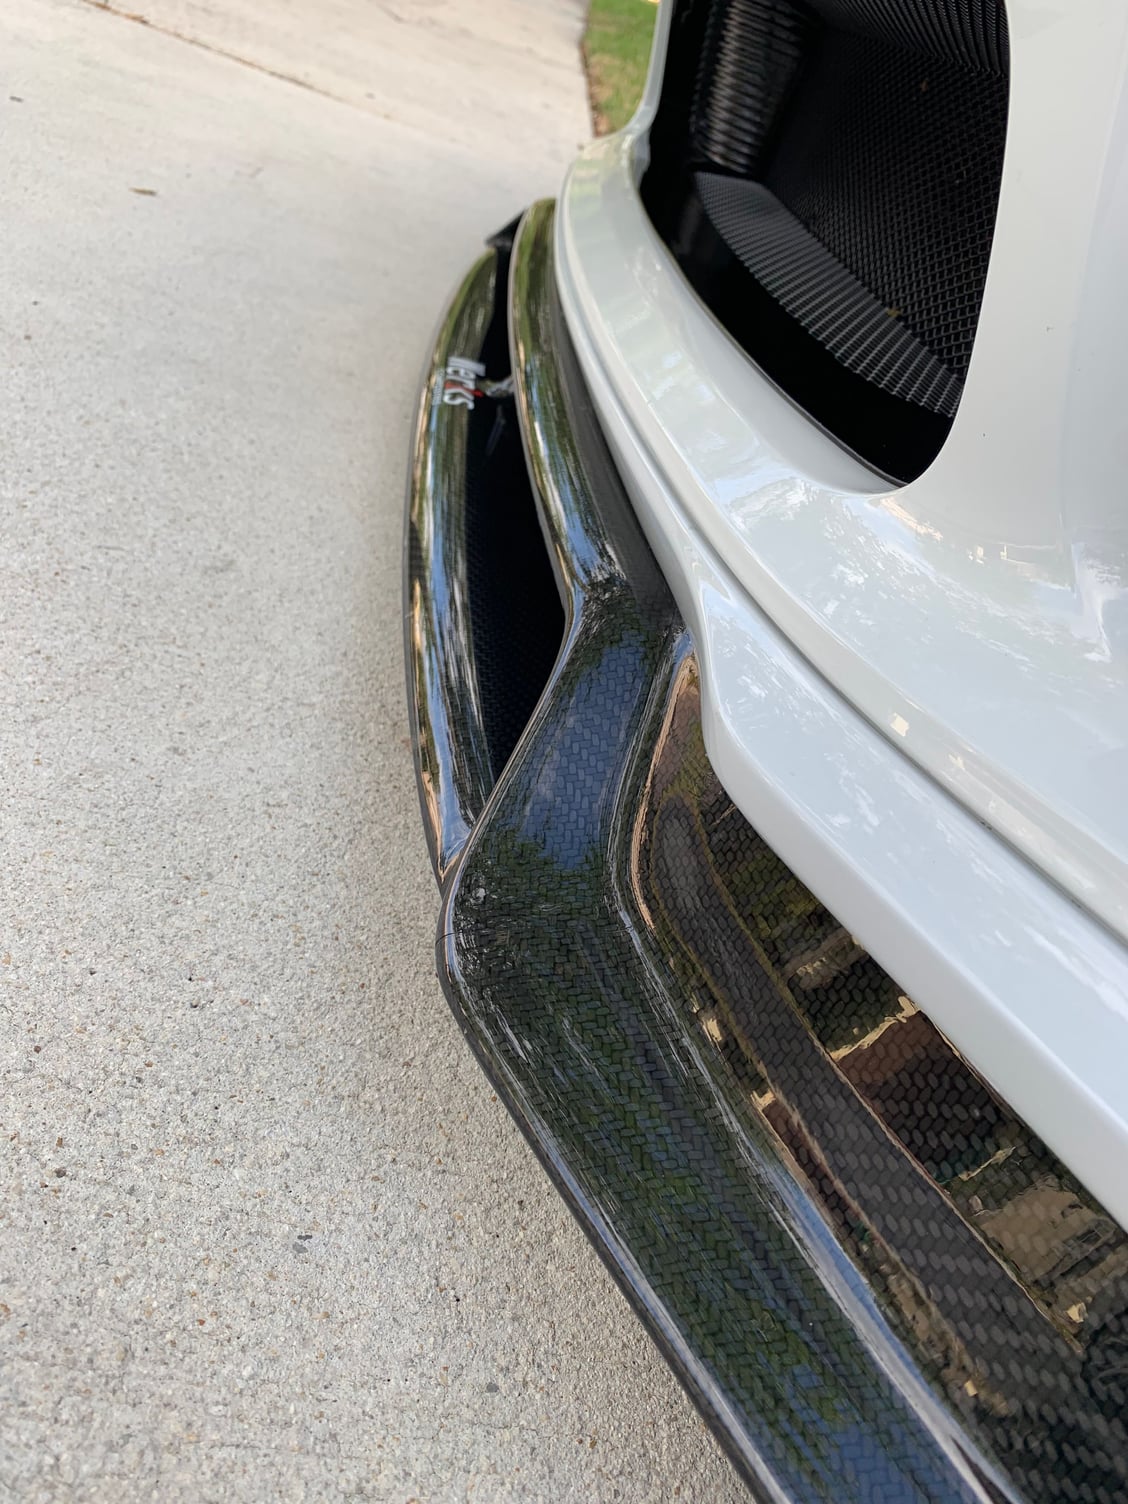 Front spoiler options that remove the air bladder? Looking for suggestions  - 6SpeedOnline - Porsche Forum and Luxury Car Resource